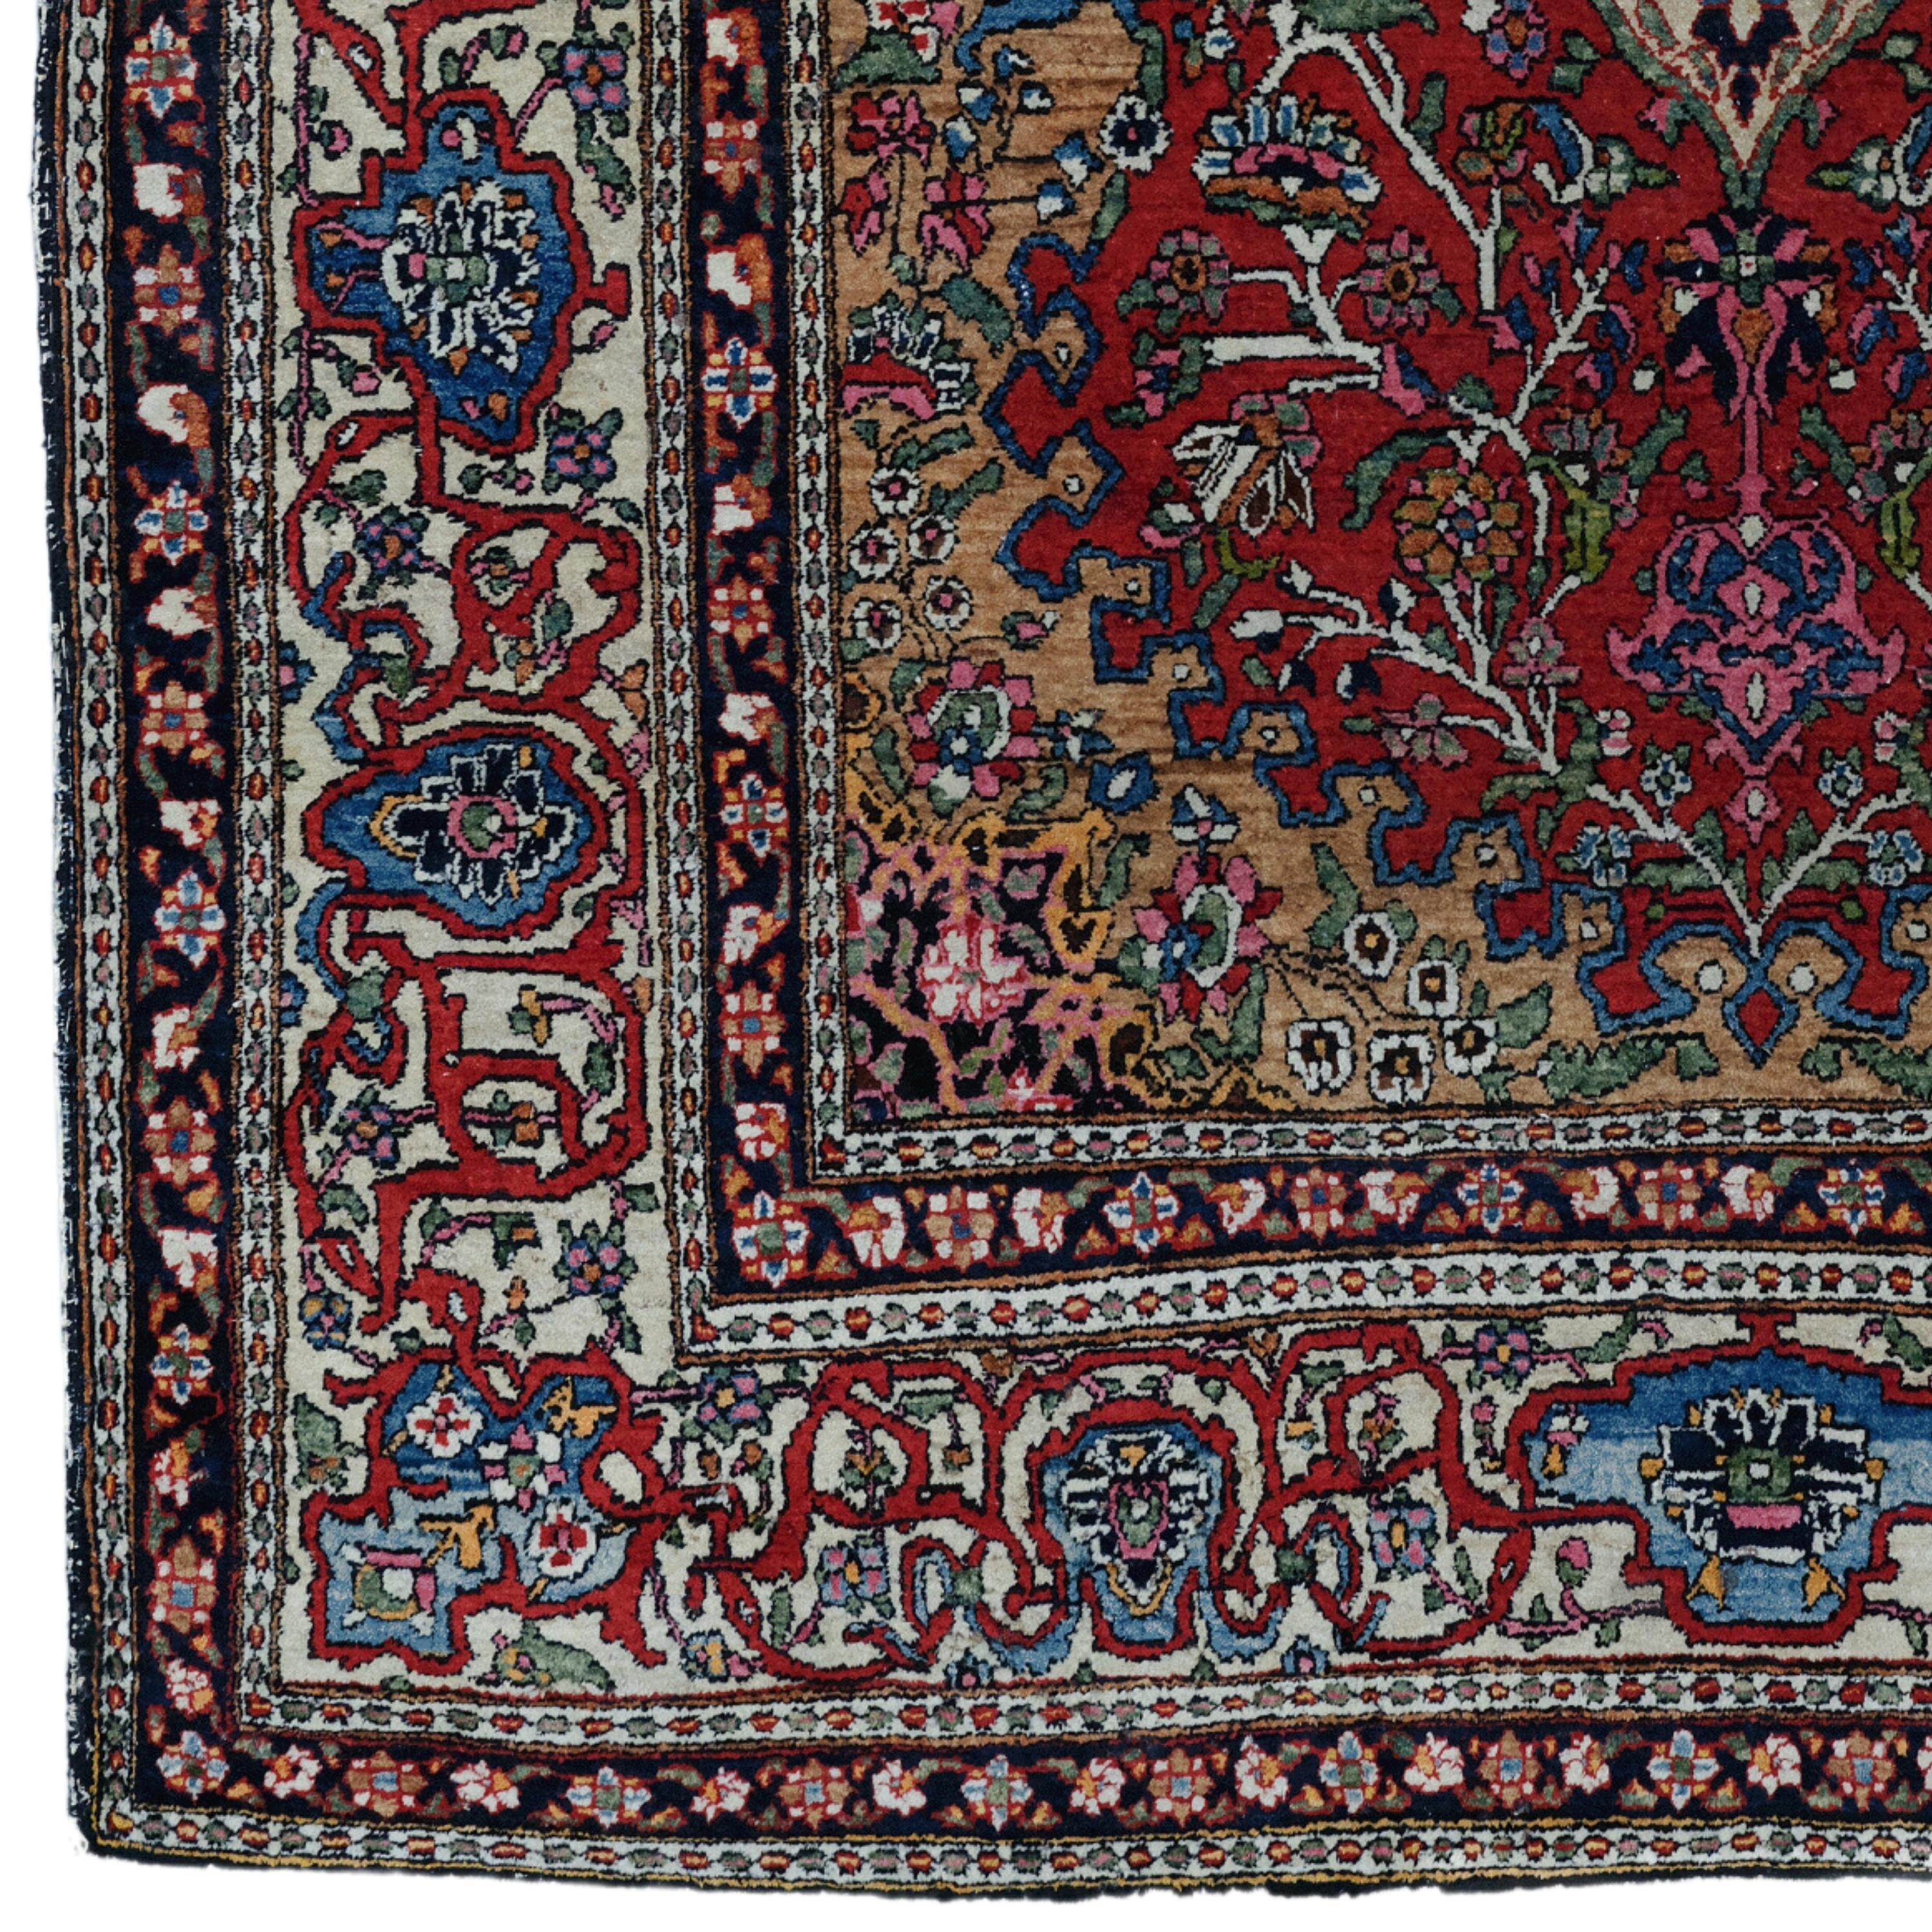 This exquisite antique Isfahan carpet is a masterpiece that displays the artistic richness and mastery of handcraftsmanship of the 19th century. This work, carefully woven with wool material, reflects the cultural diversity of its period. This